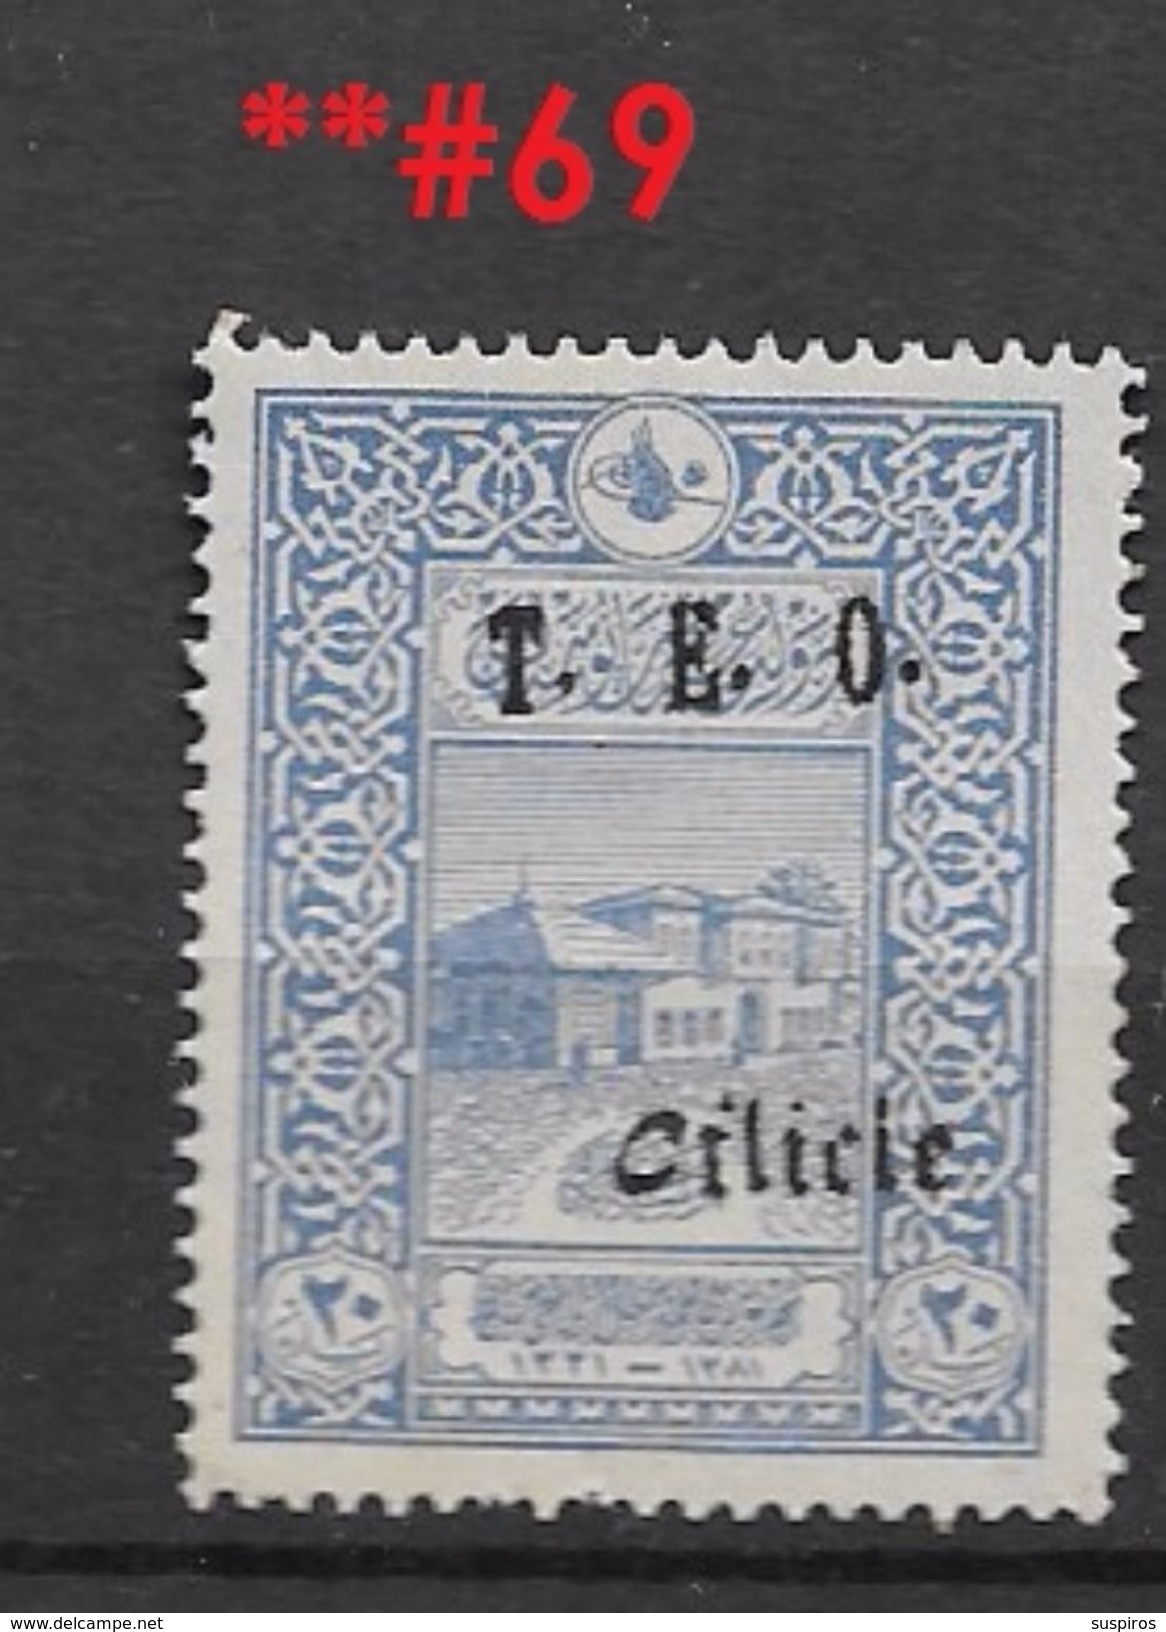 CILICIA  YVERT 69 **1919 Turkish Postage Stamps Of 1916 Handstamp Overprinted "CILICIE" T.E.O MNH - Ungebraucht